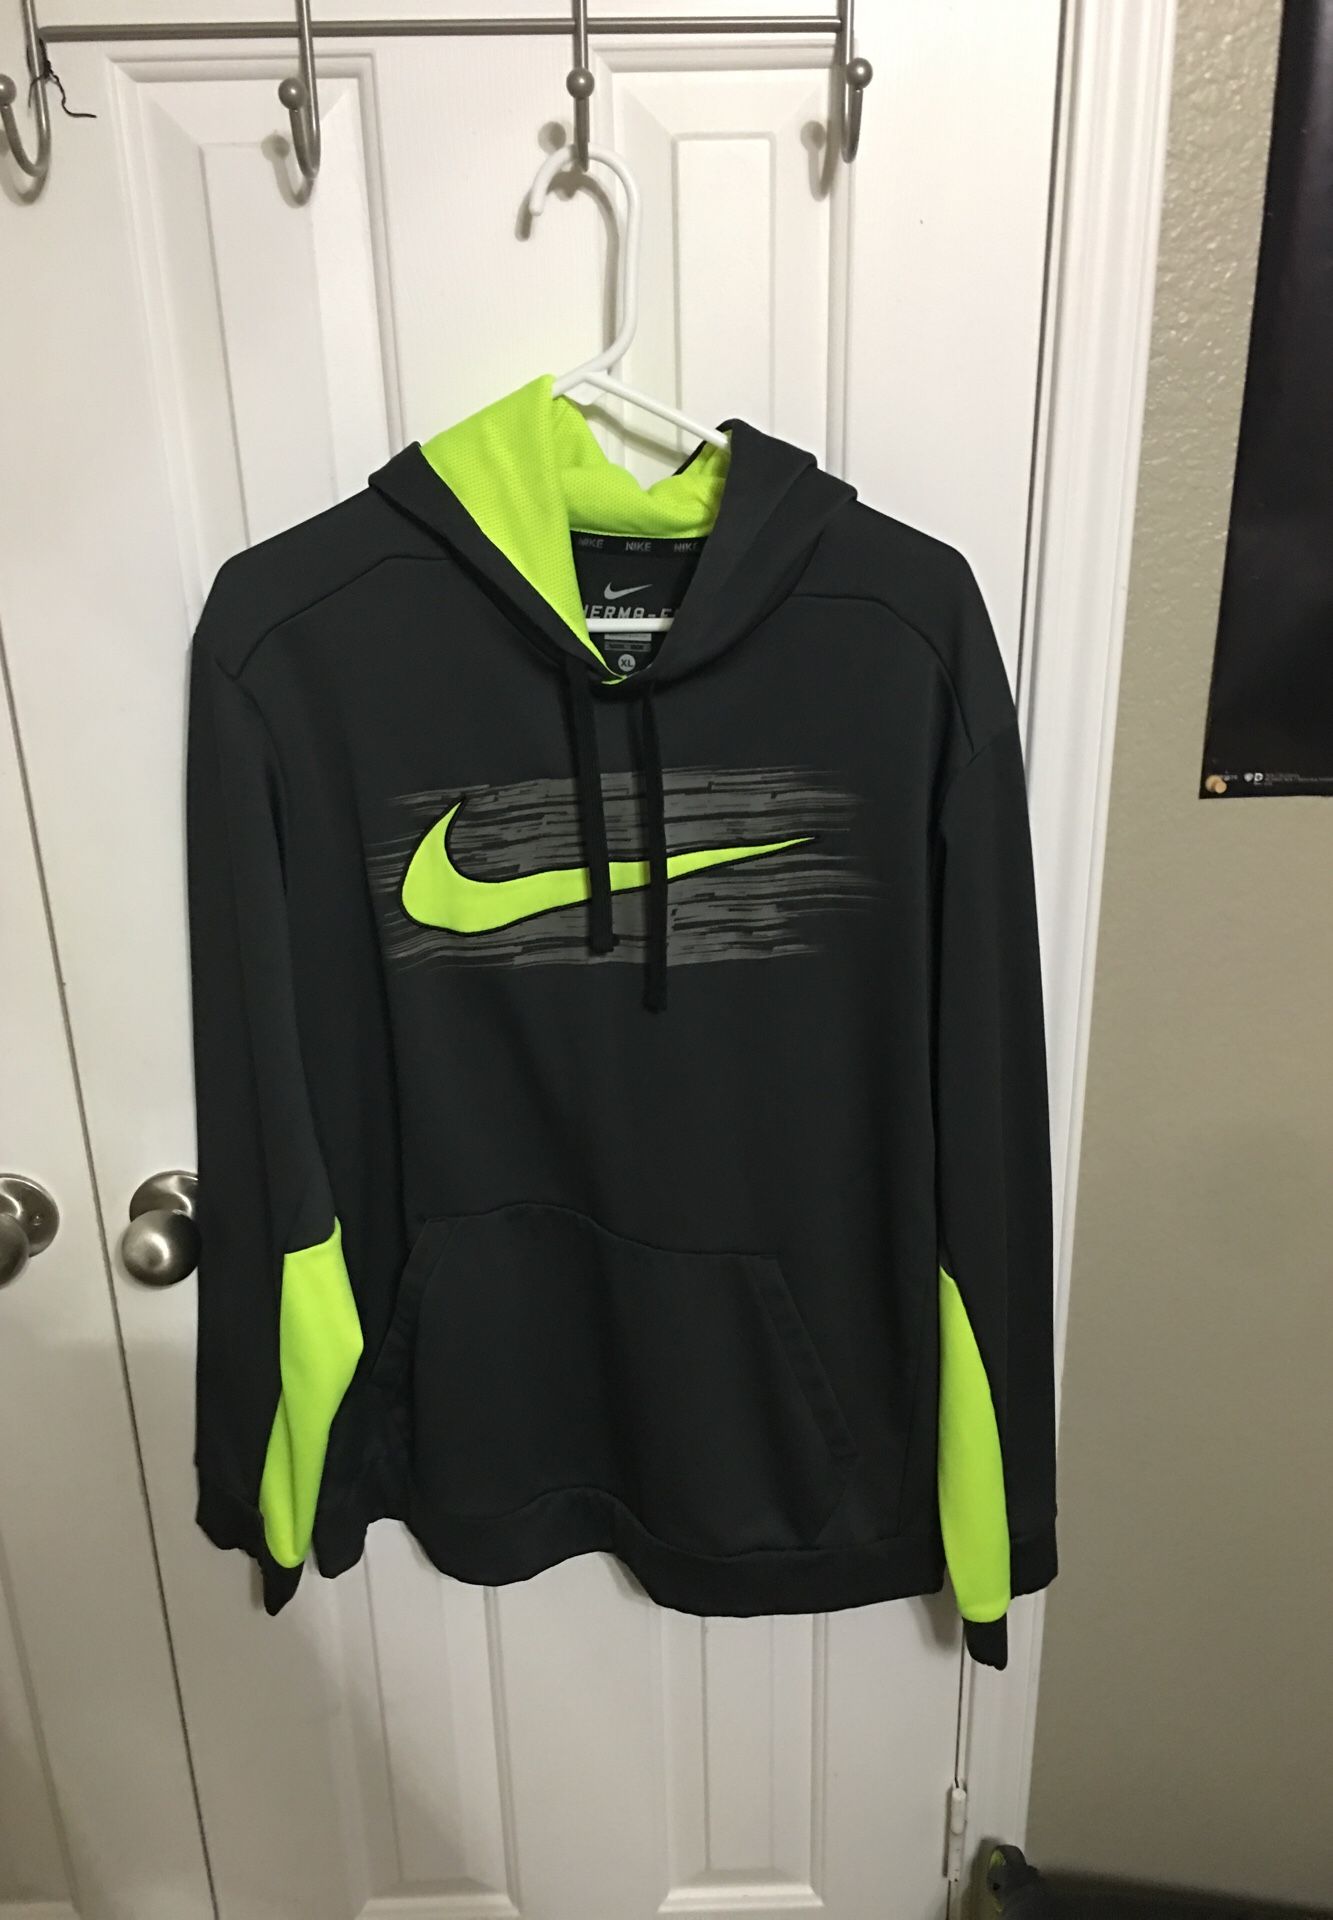 Nike Therma-Fit pullover hoodie Highlighter yellow/Grey. Size XL